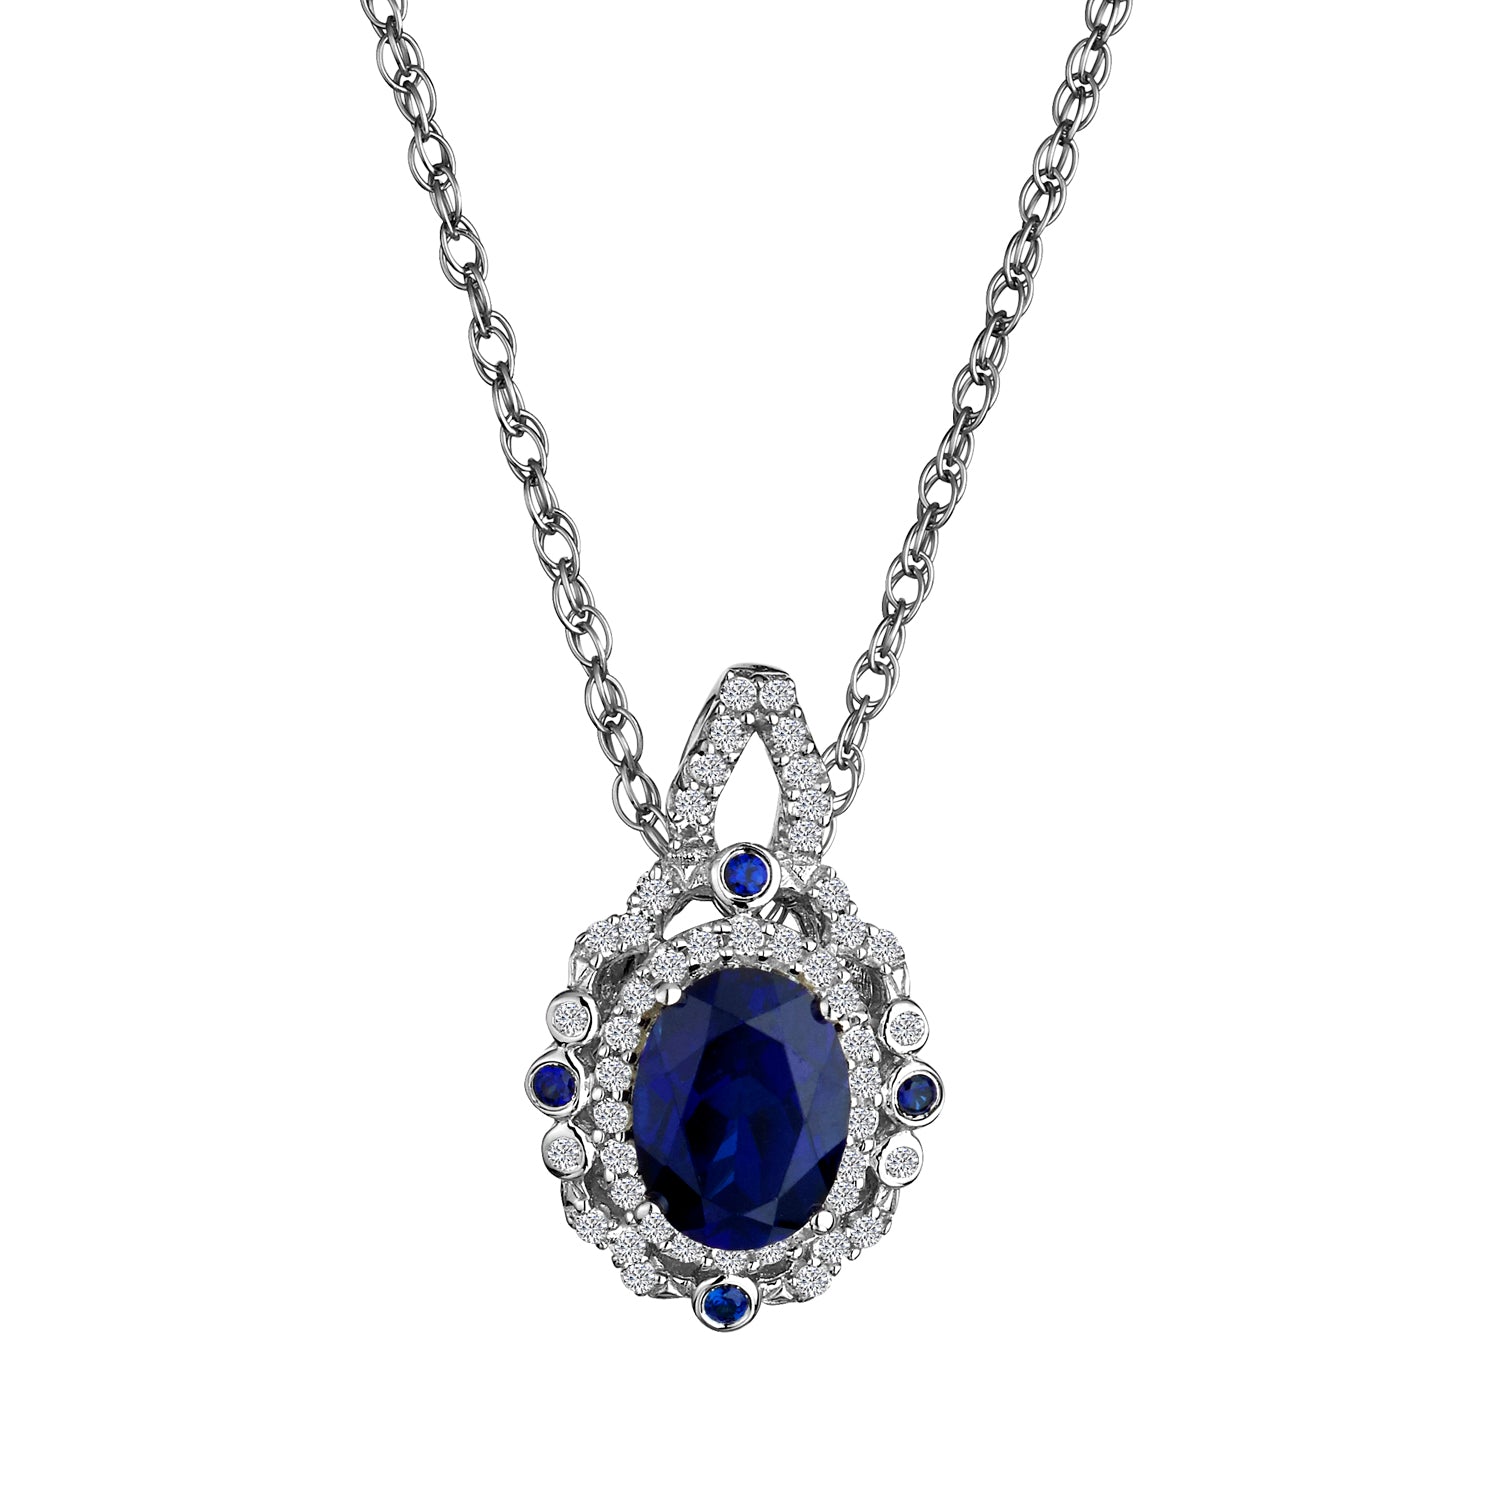 Created Blue & White Sapphire Pendant,  Sterling Silver. Necklaces and Pendants. Griffin Jewellery Designs. 